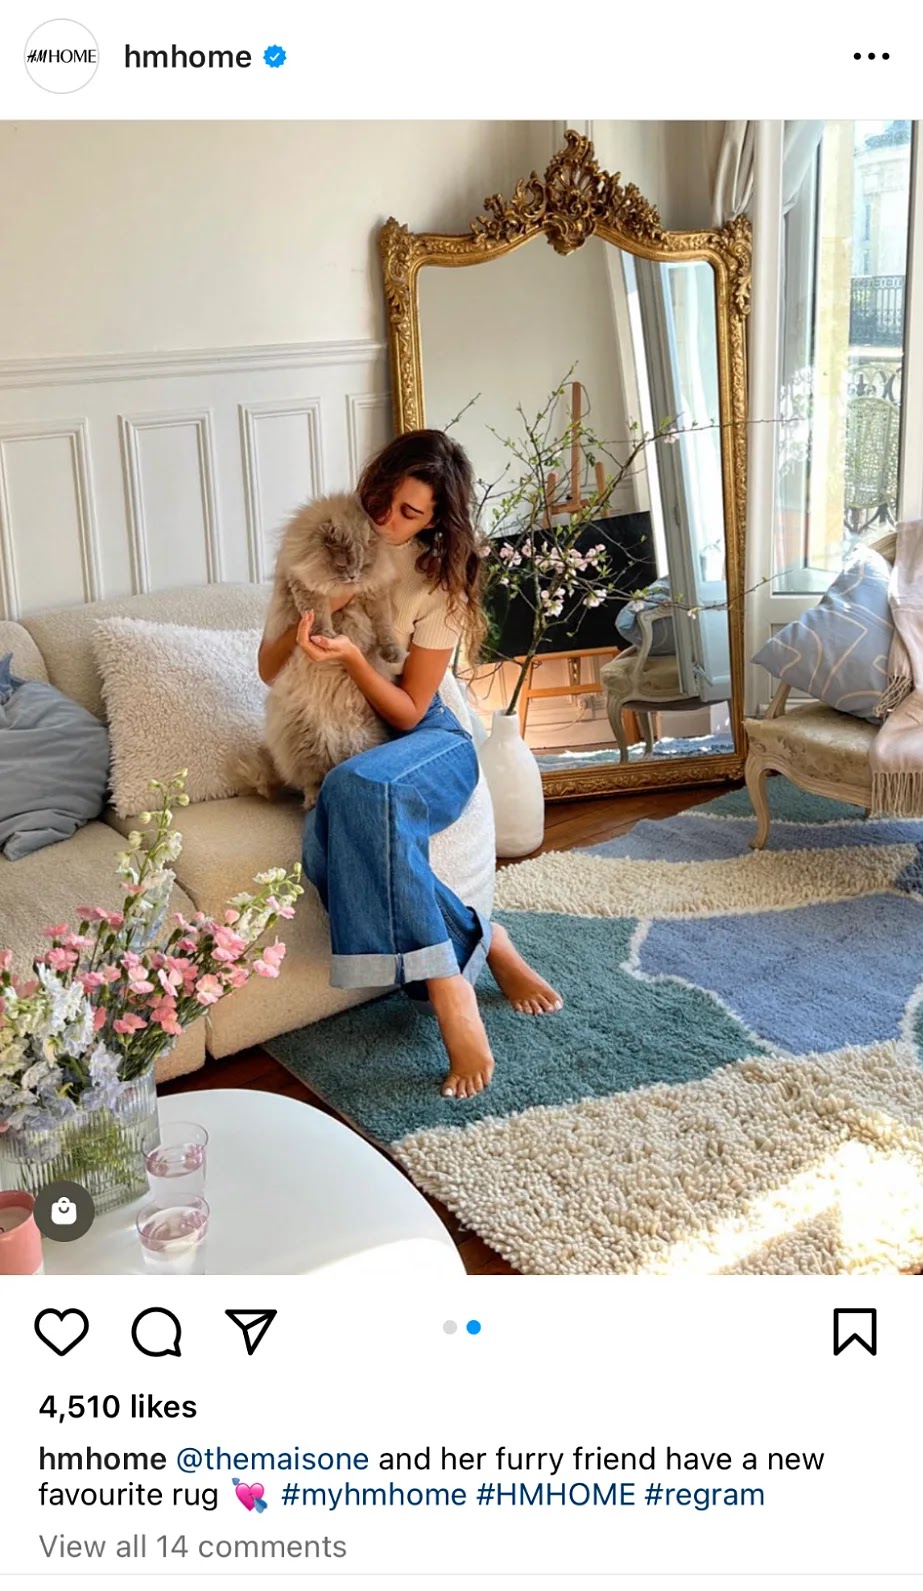 An Instagram post by H&M Home with "@themaisone and her furry friend have a new favourite rug" description